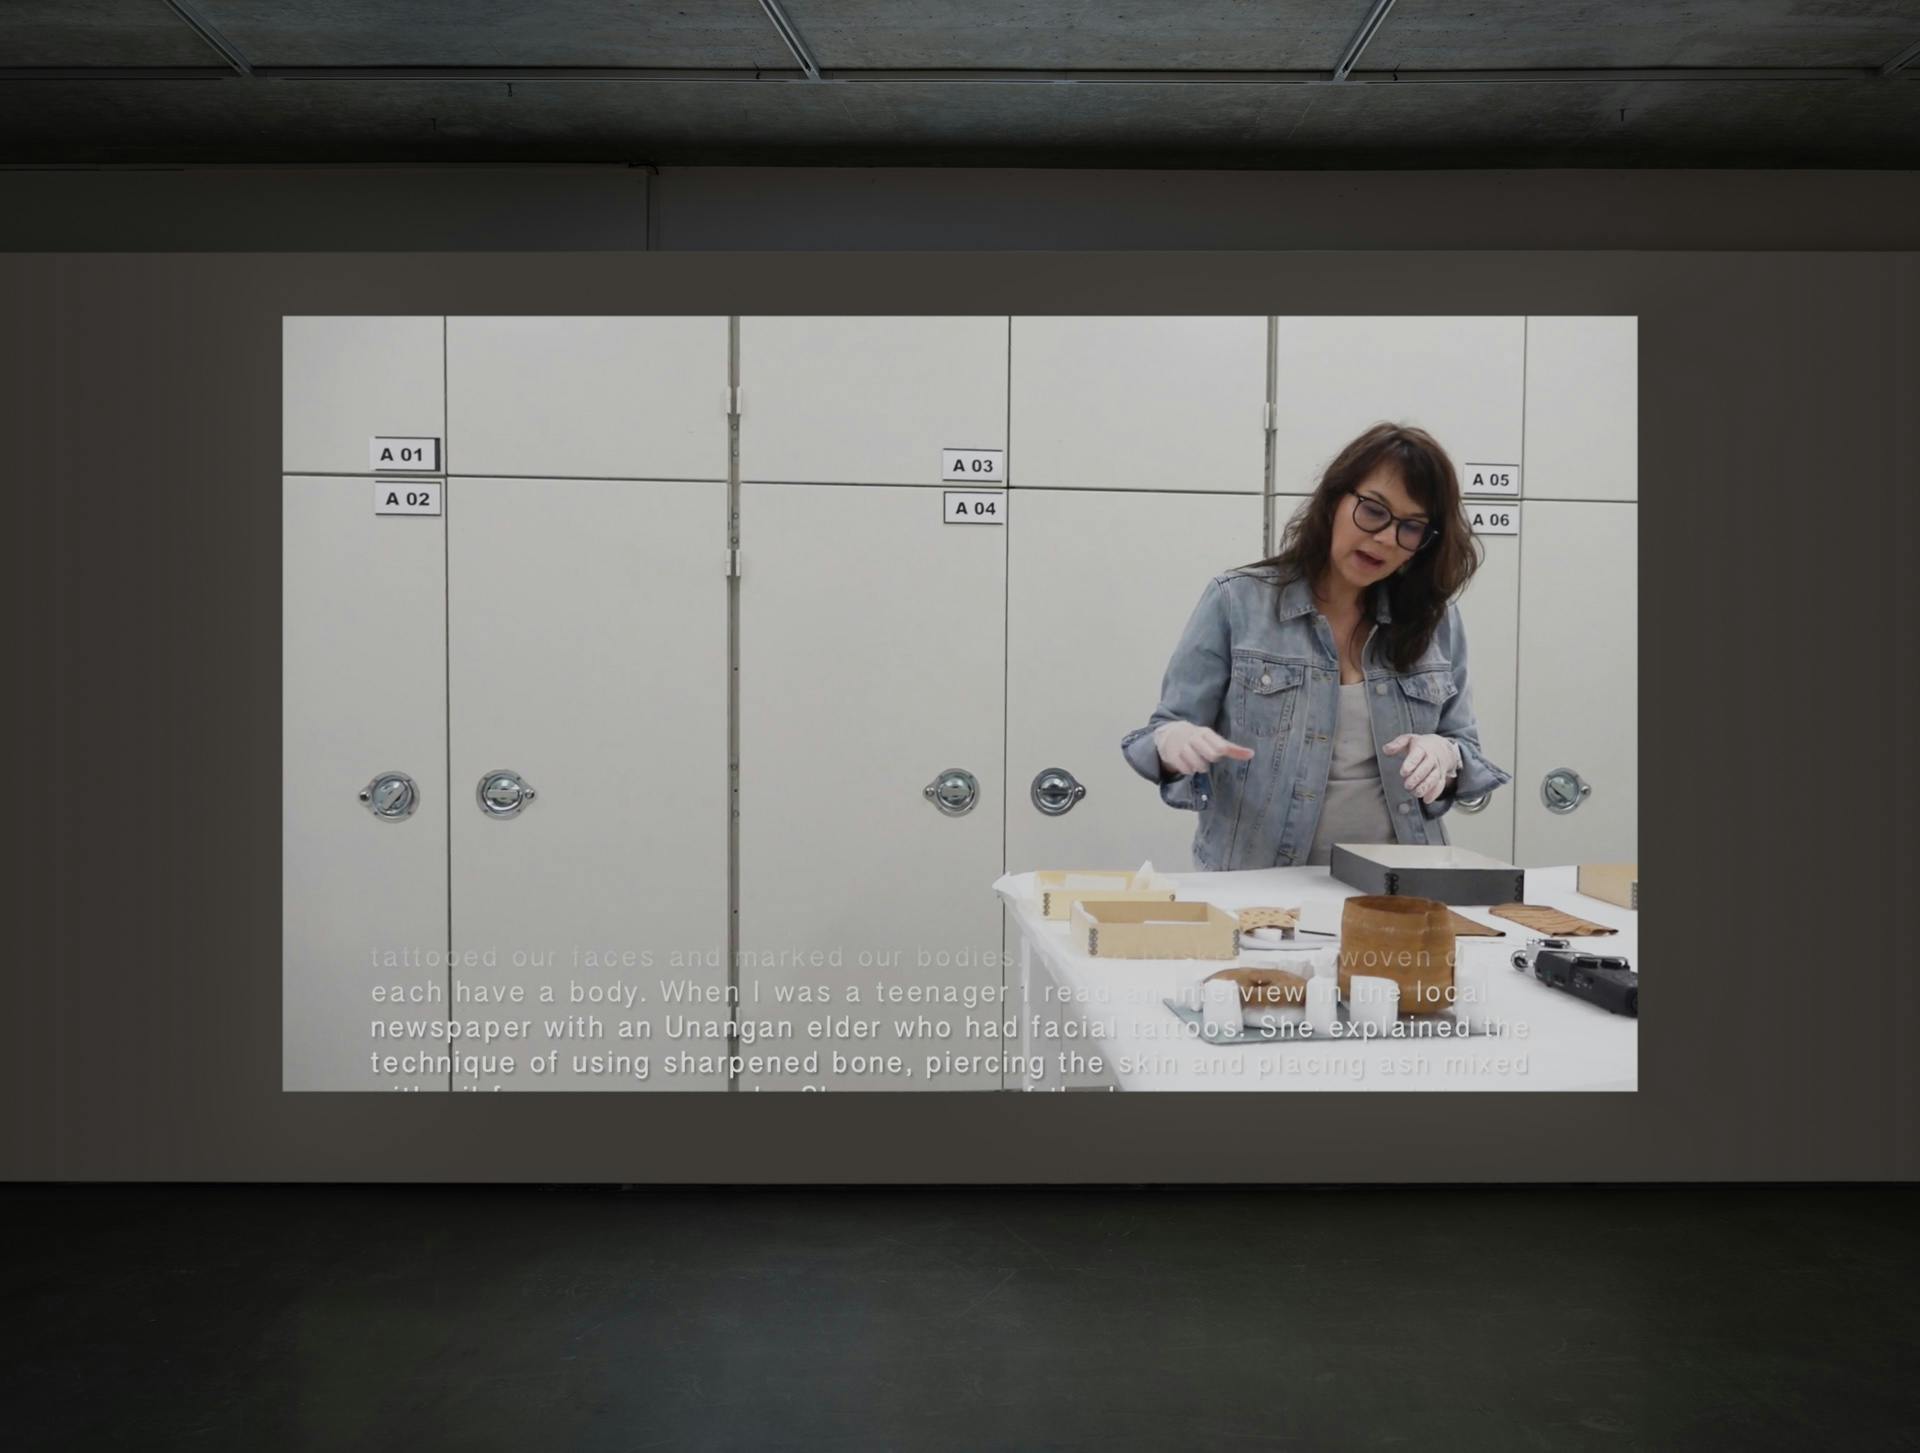 Video by Tanya Lukin Linklater projected on a wall in a dark room. Video depicts Lukin Linklater wearing white gloves in front of storage lockers, speaking at a table with archival boxes and objects.